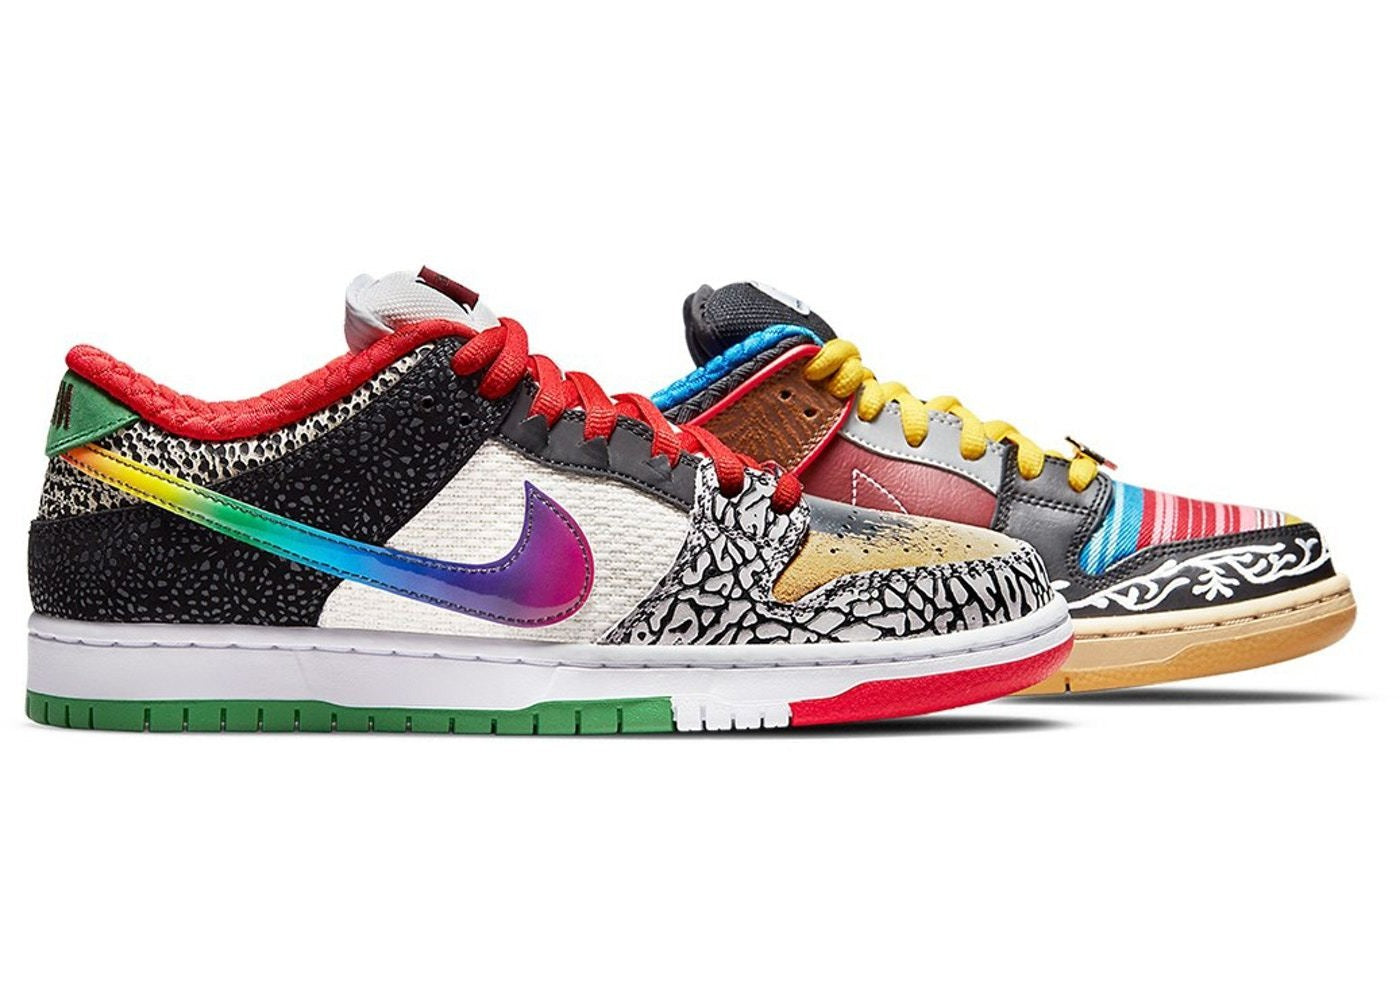 NIKE SB DUNK LOW “ What The Paul “  27.5